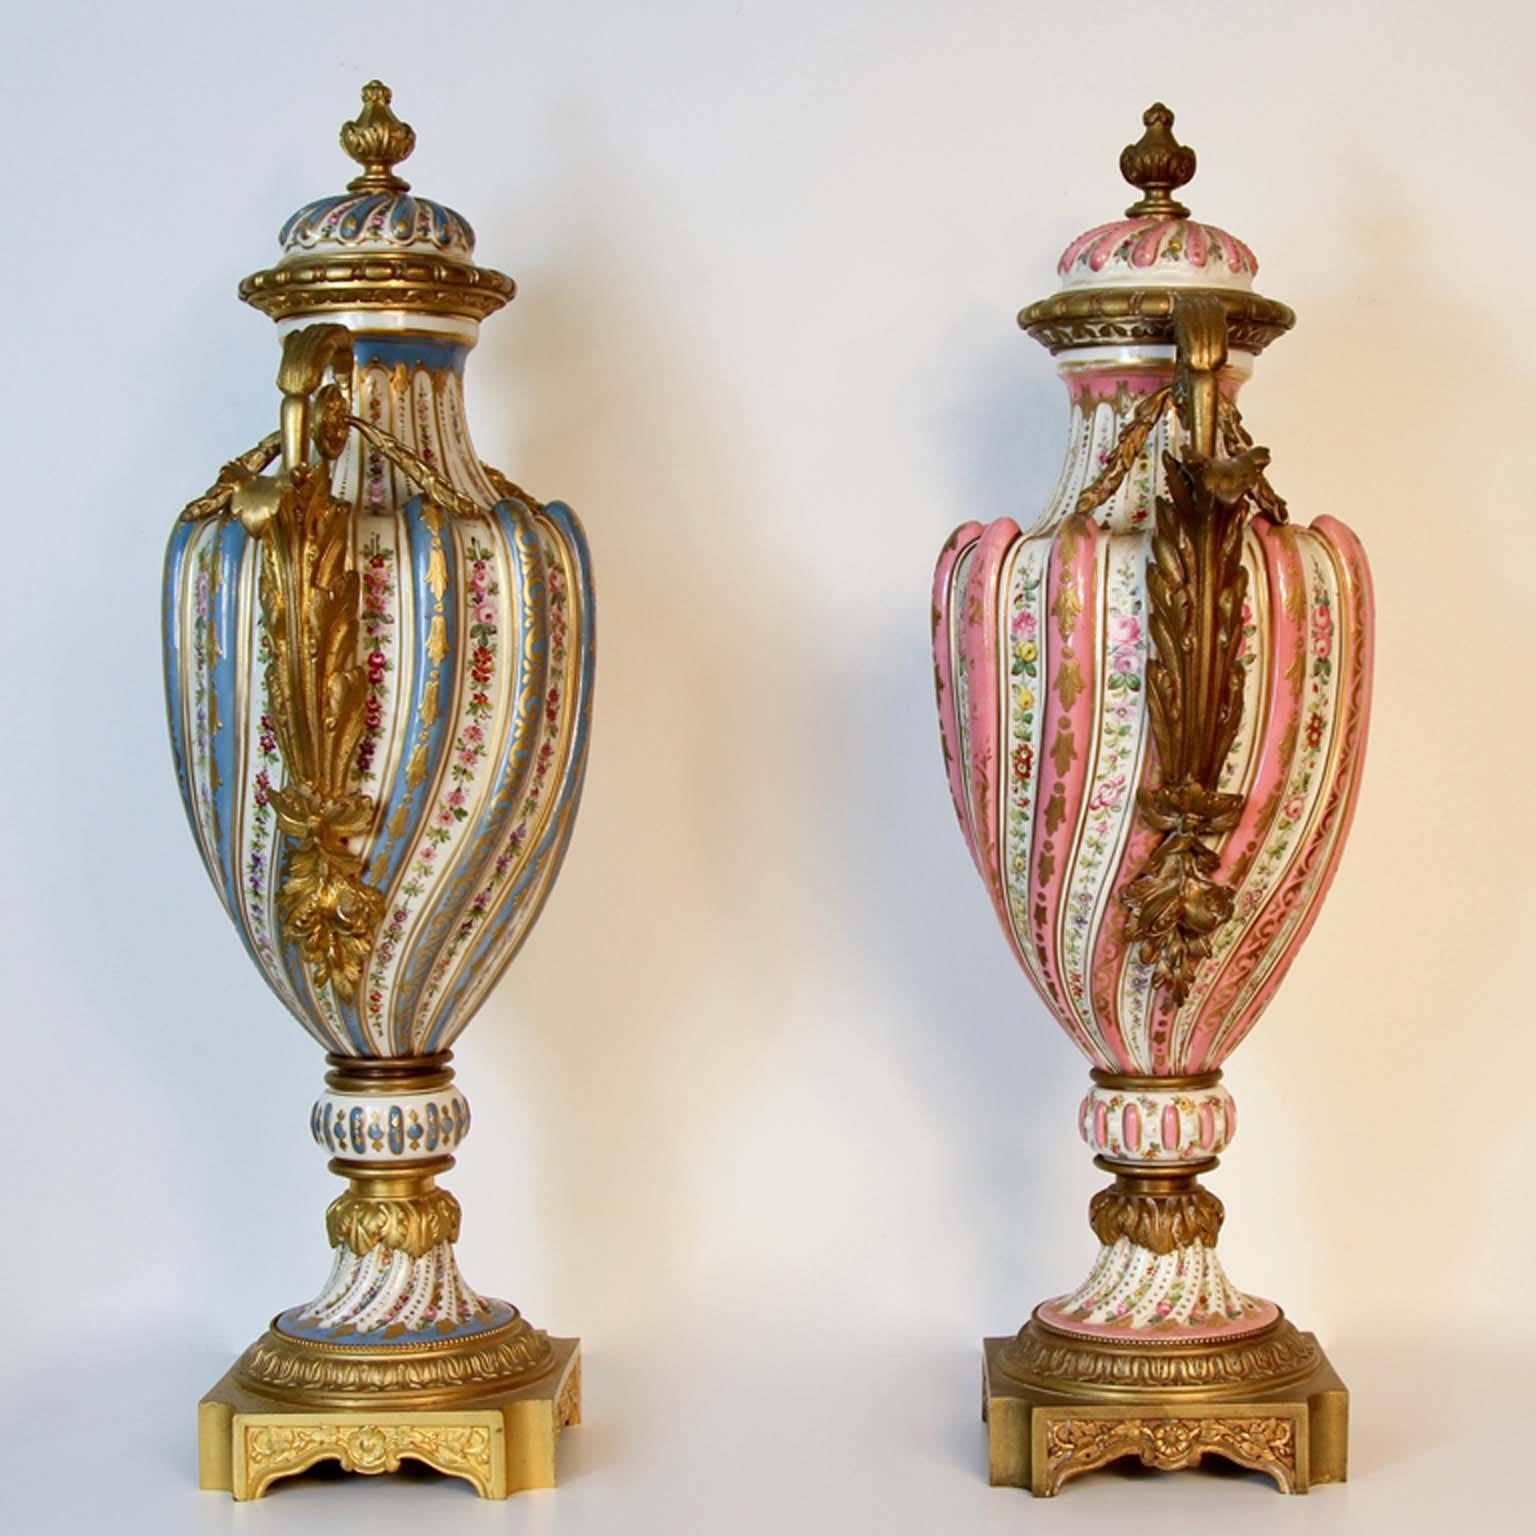 Two fine large 19th century French Sevres urns in celeste blue and pink porcelain. Having rich raised gold enamel decoration with roses and leaves adorning each urn. Museum quality cast bronze mounts all original as side handles, base and top with